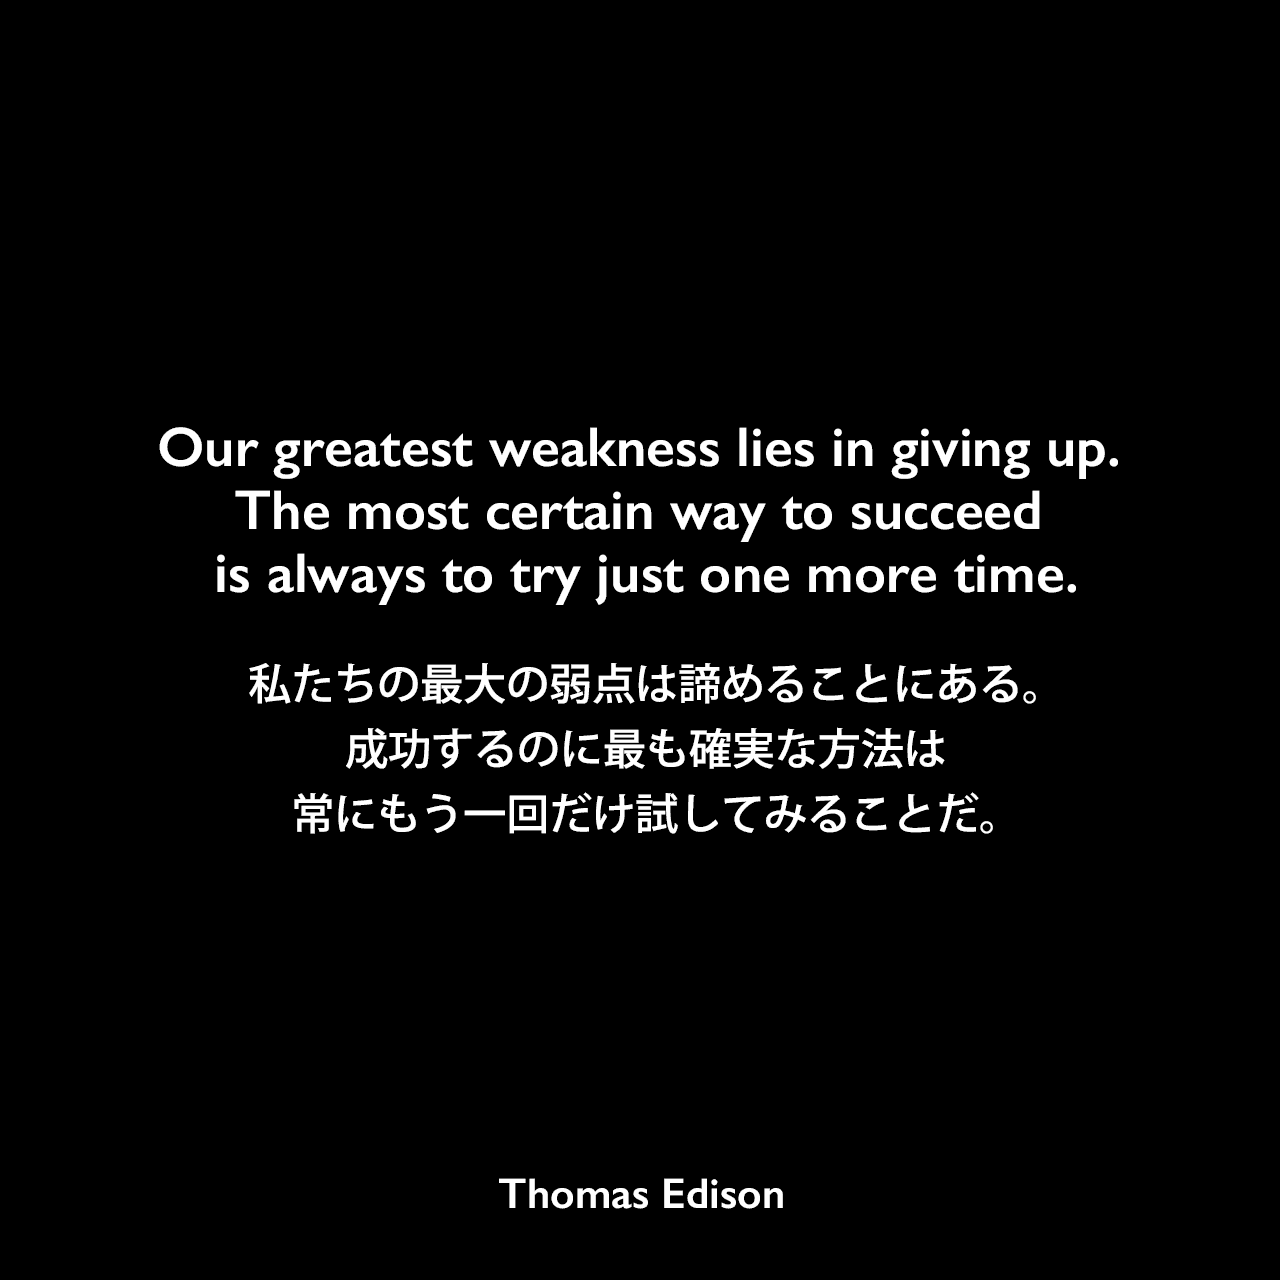 Our greatest weakness lies in giving up. The most certain way to succeed is always to try just one more time.私たちの最大の弱点は諦めることにある。成功するのに最も確実な方法は、常にもう一回だけ試してみることだ。